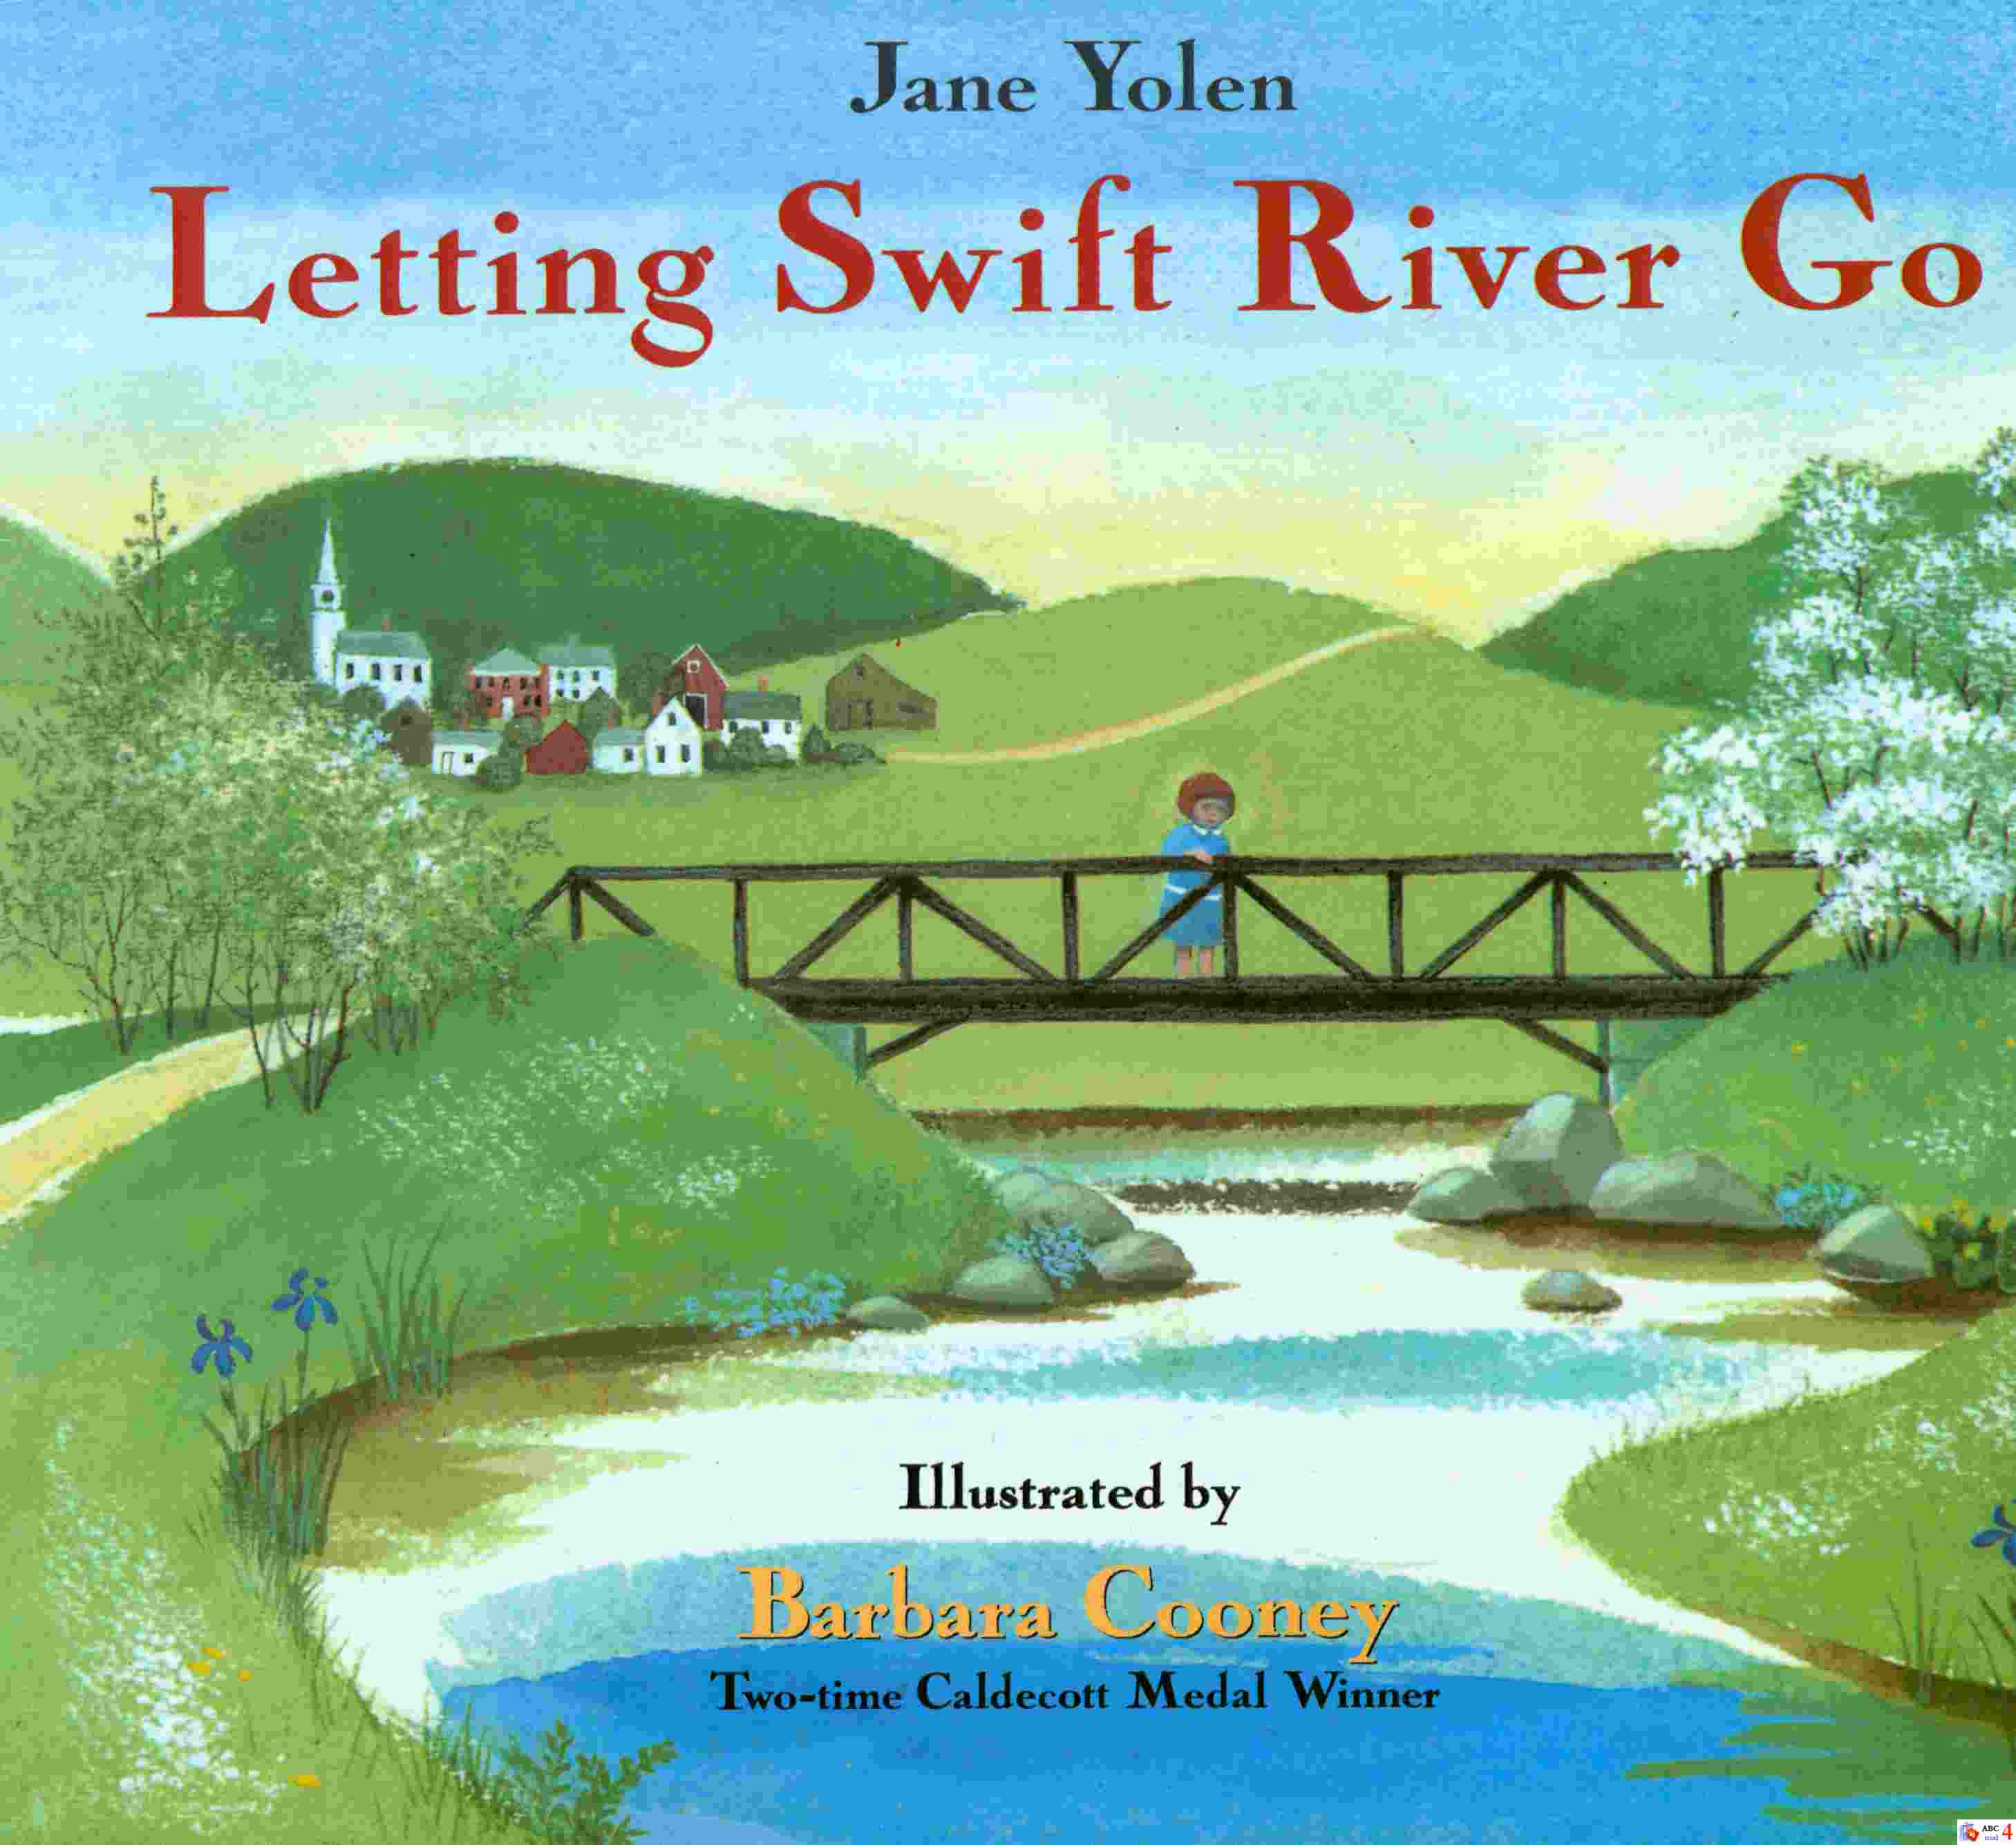 Letting Swift River go 書封